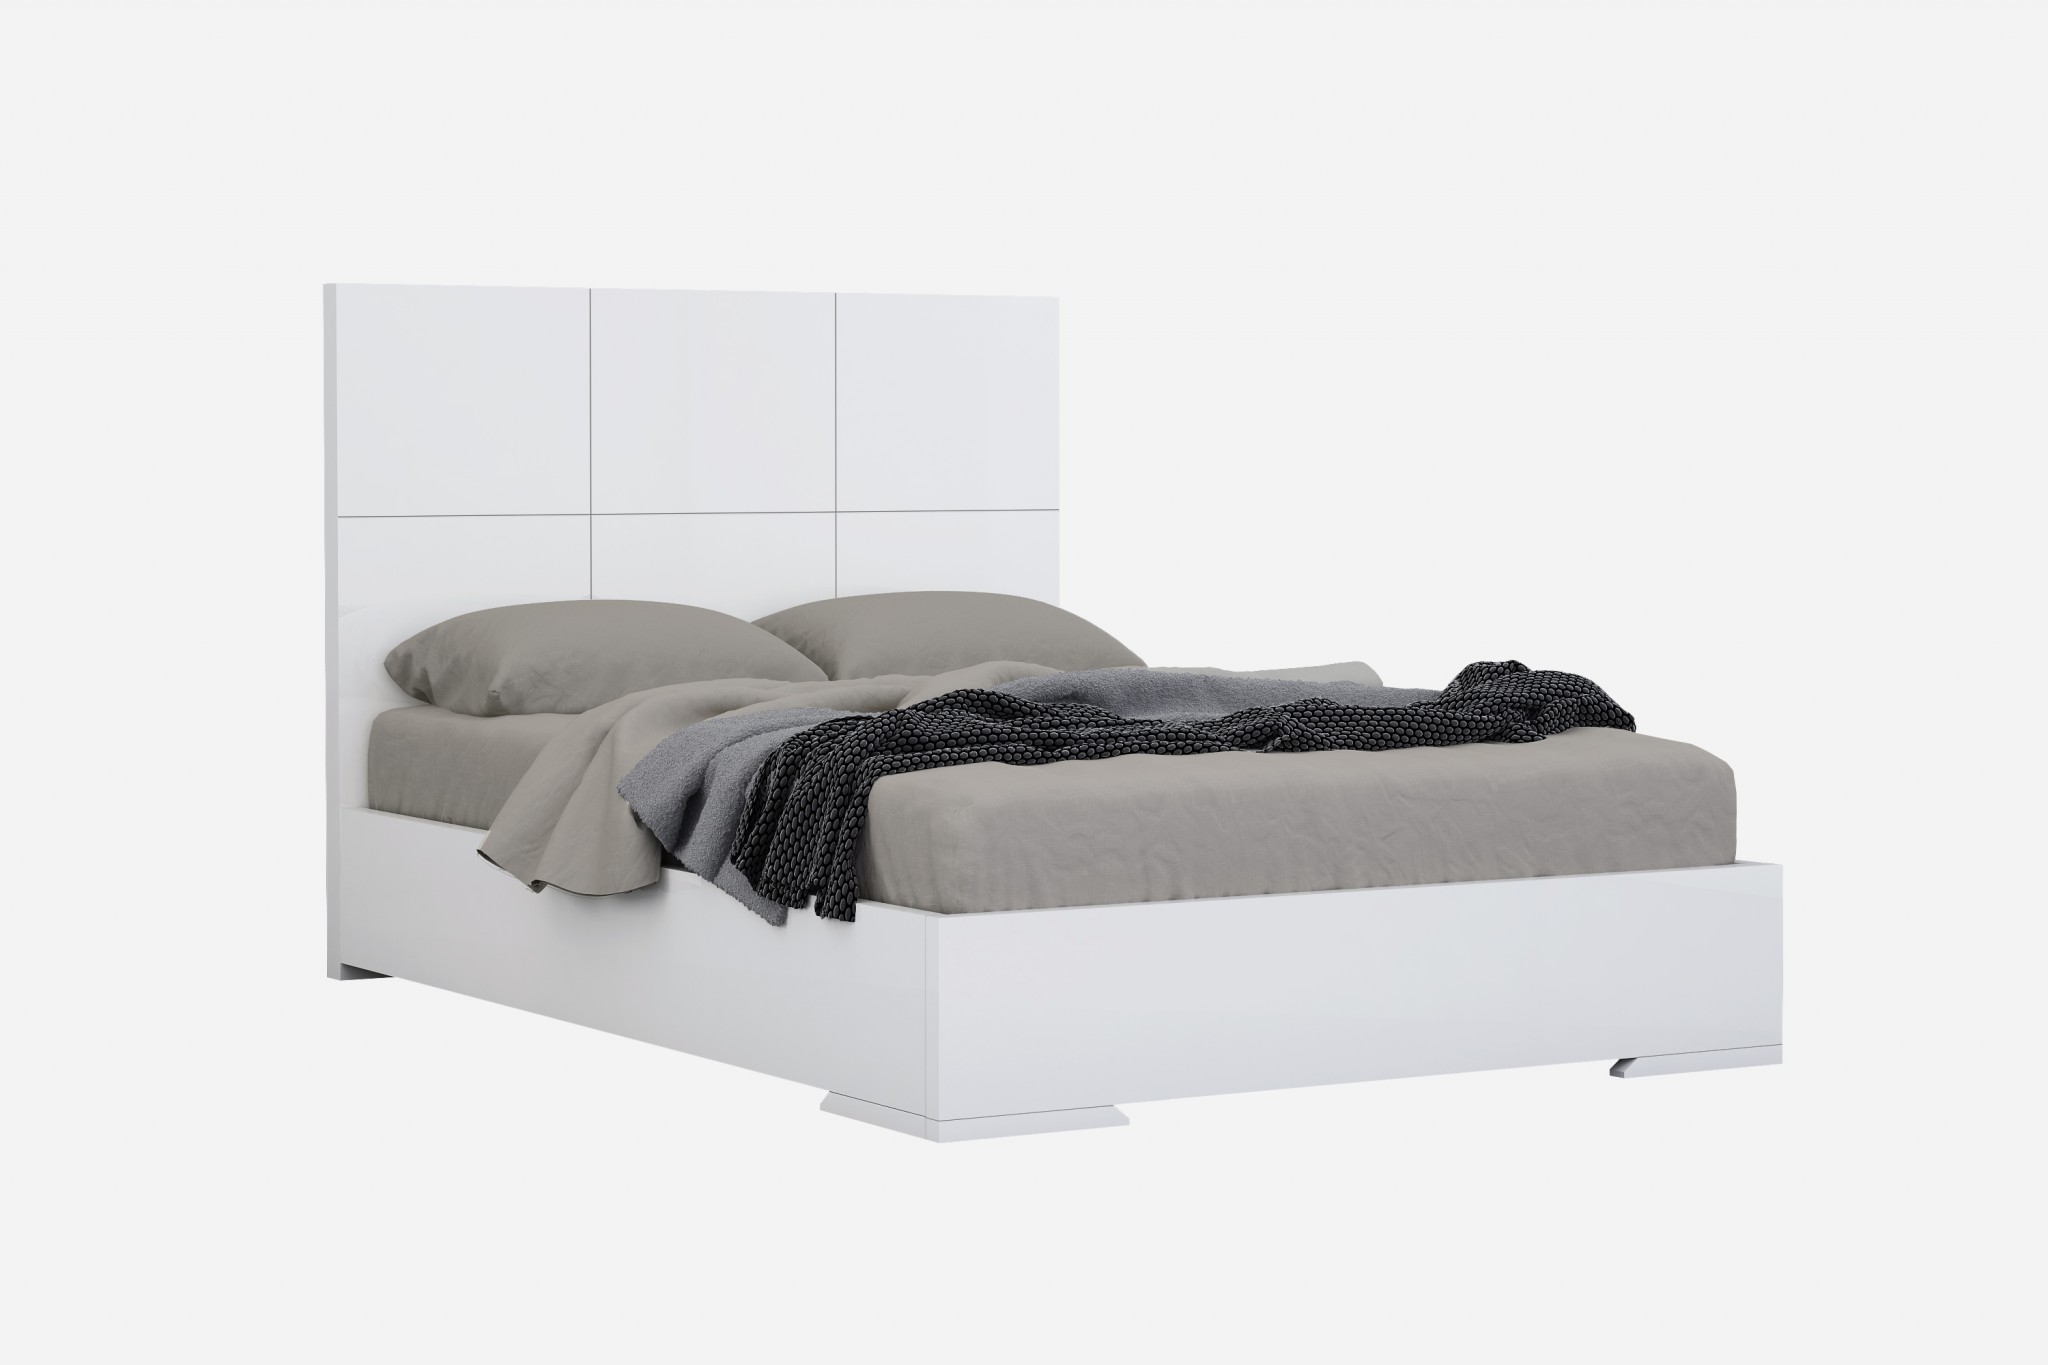 81" X 85" X 48" White Stainless Steel King Bed